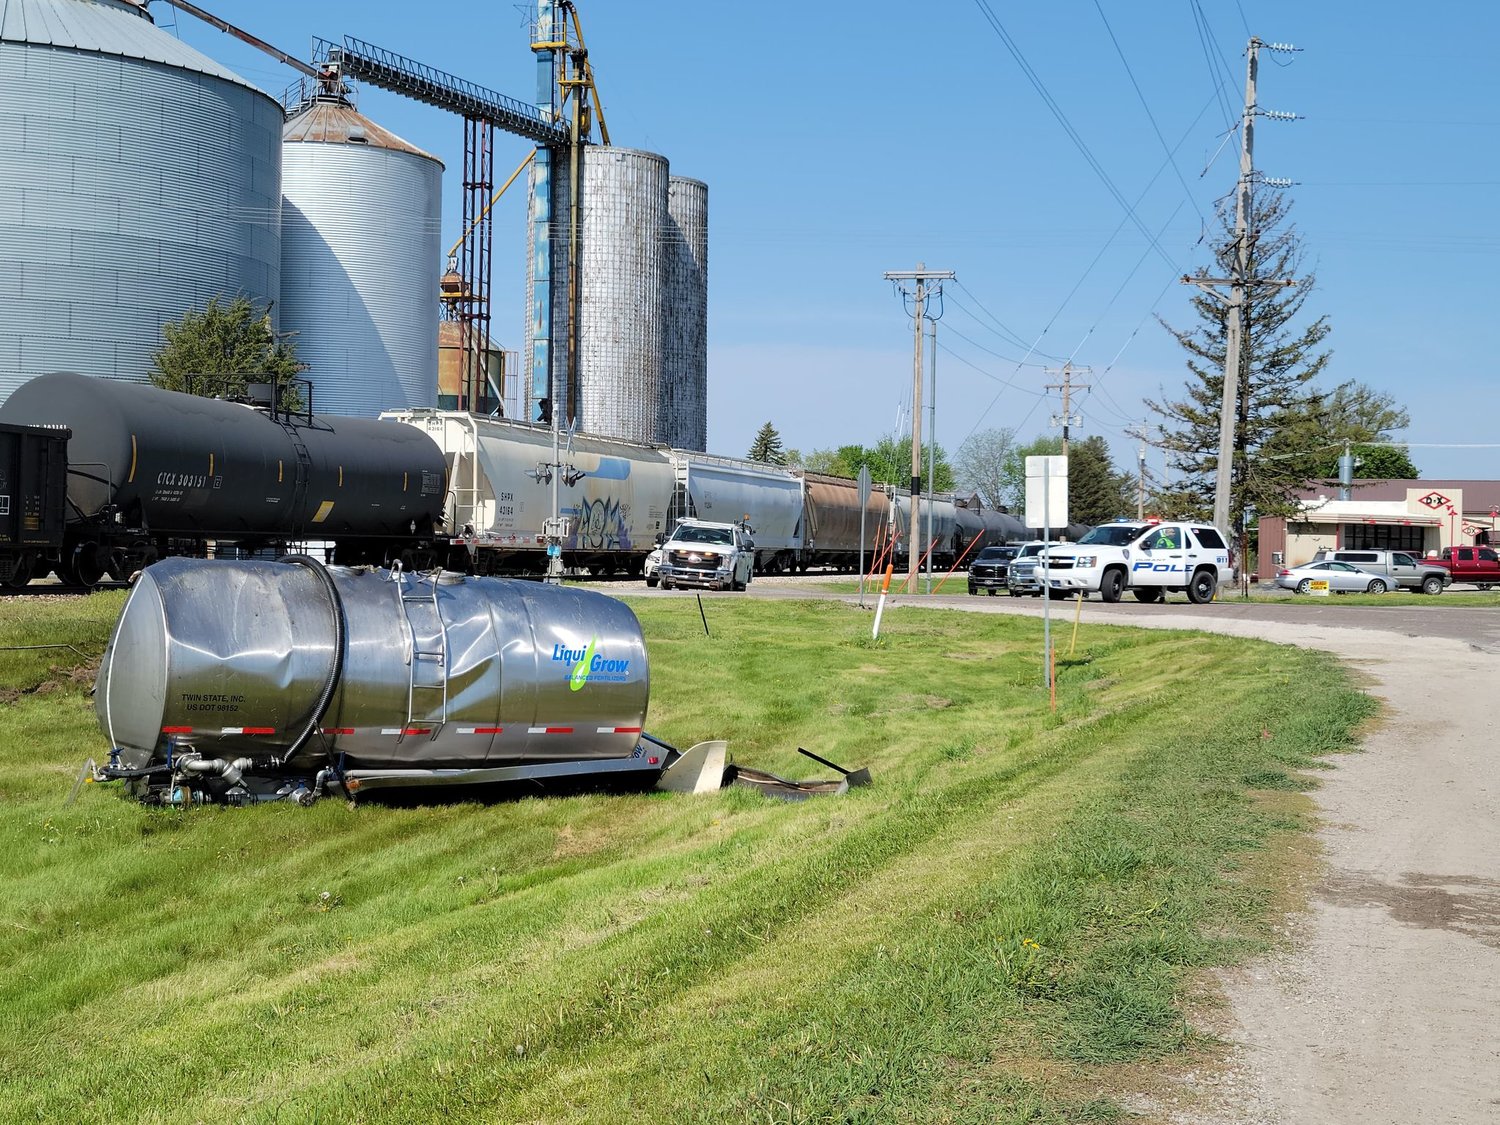 An eastbound train collision with a Liqui-Grow truck left this tank next to tracks in Durant Friday morning.